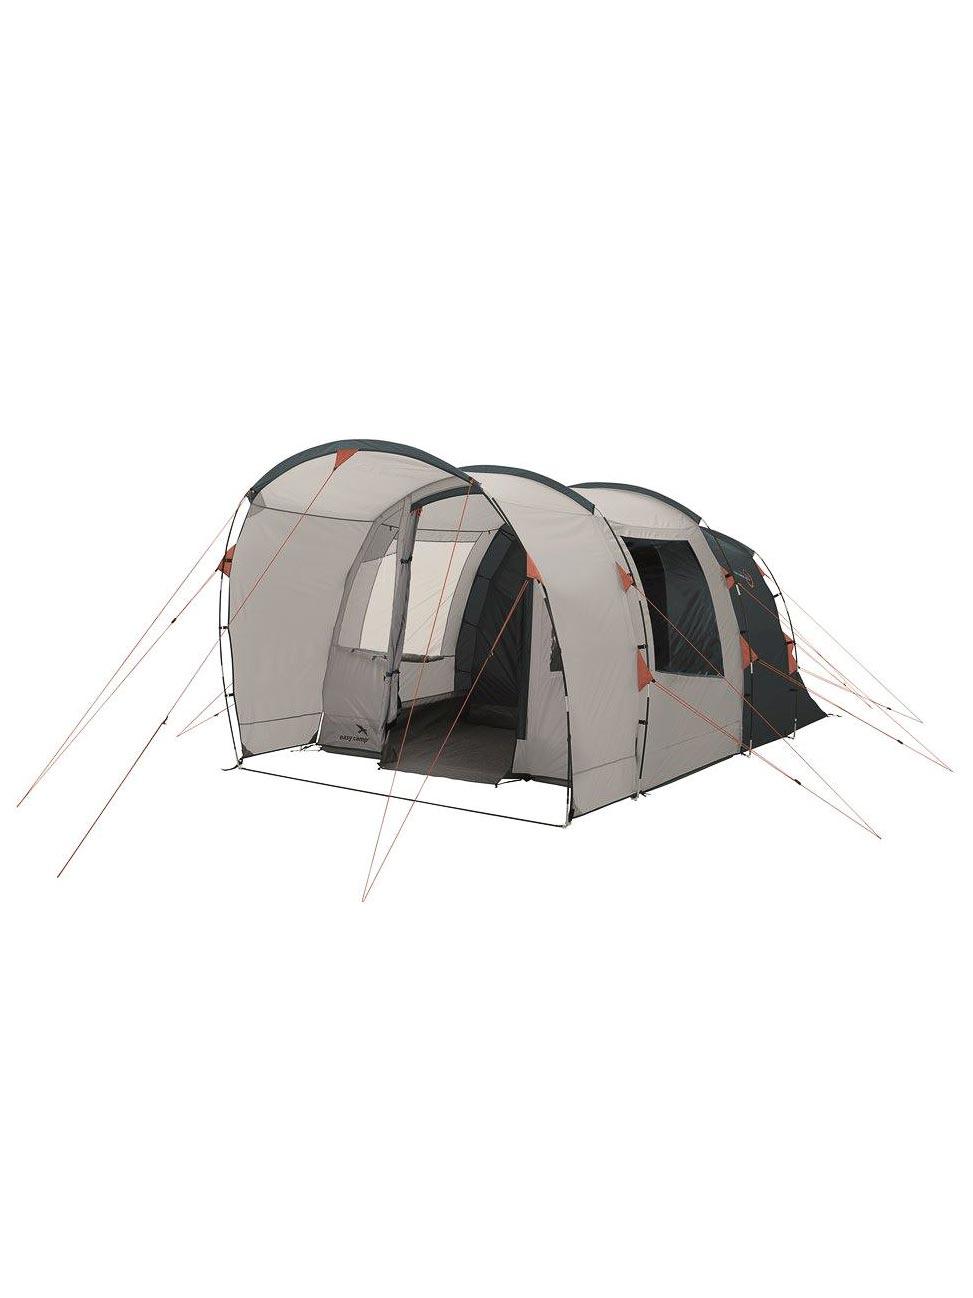 Selected image for EASY CAMP Šator Palmdale 300 Tent plavi